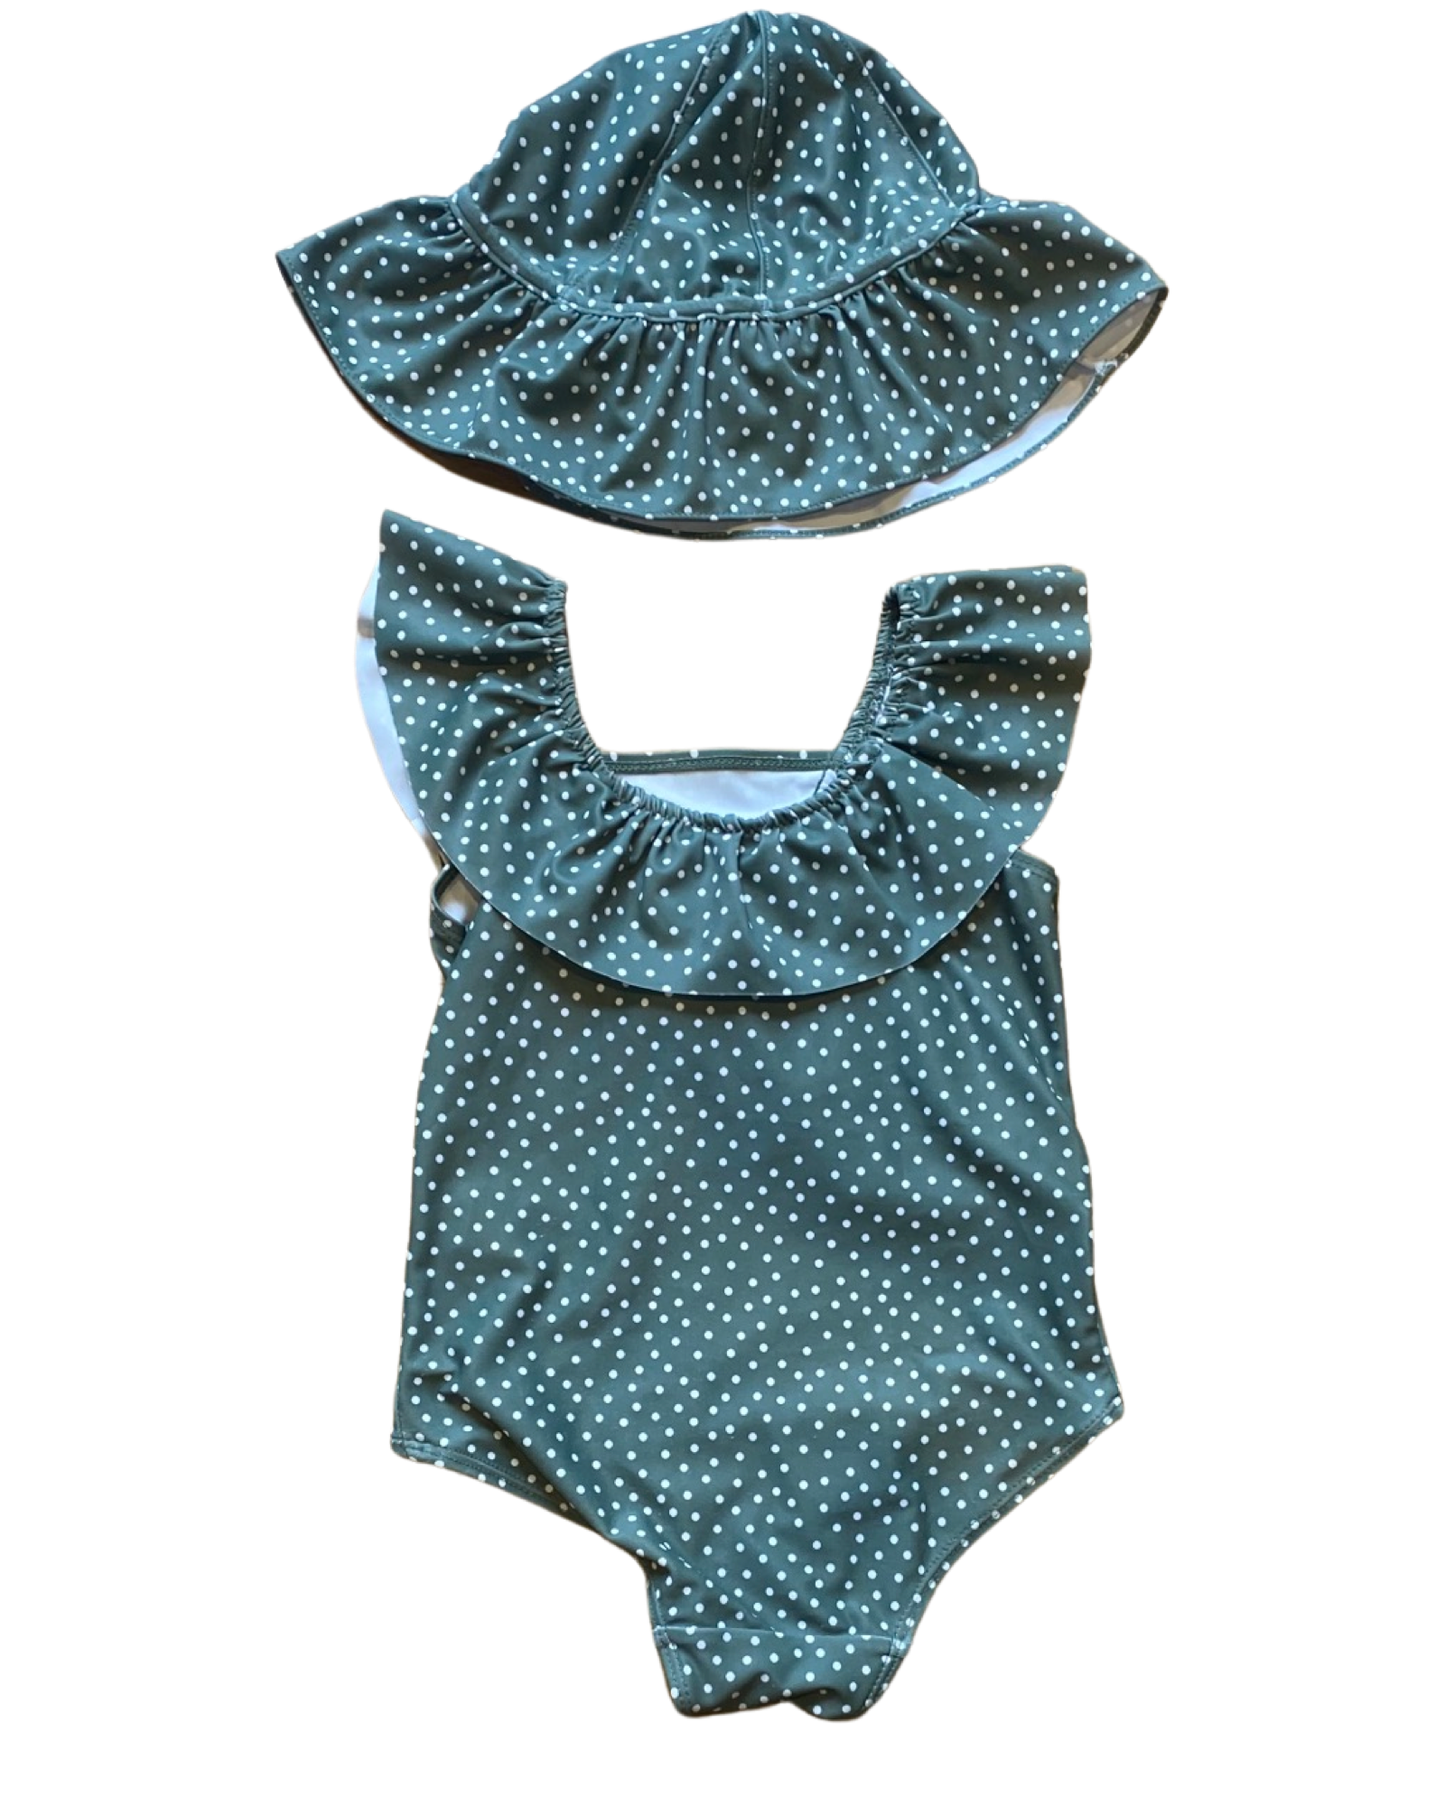 H&M green dotty swimsuit with matching hat (size 1.5-2yrs)